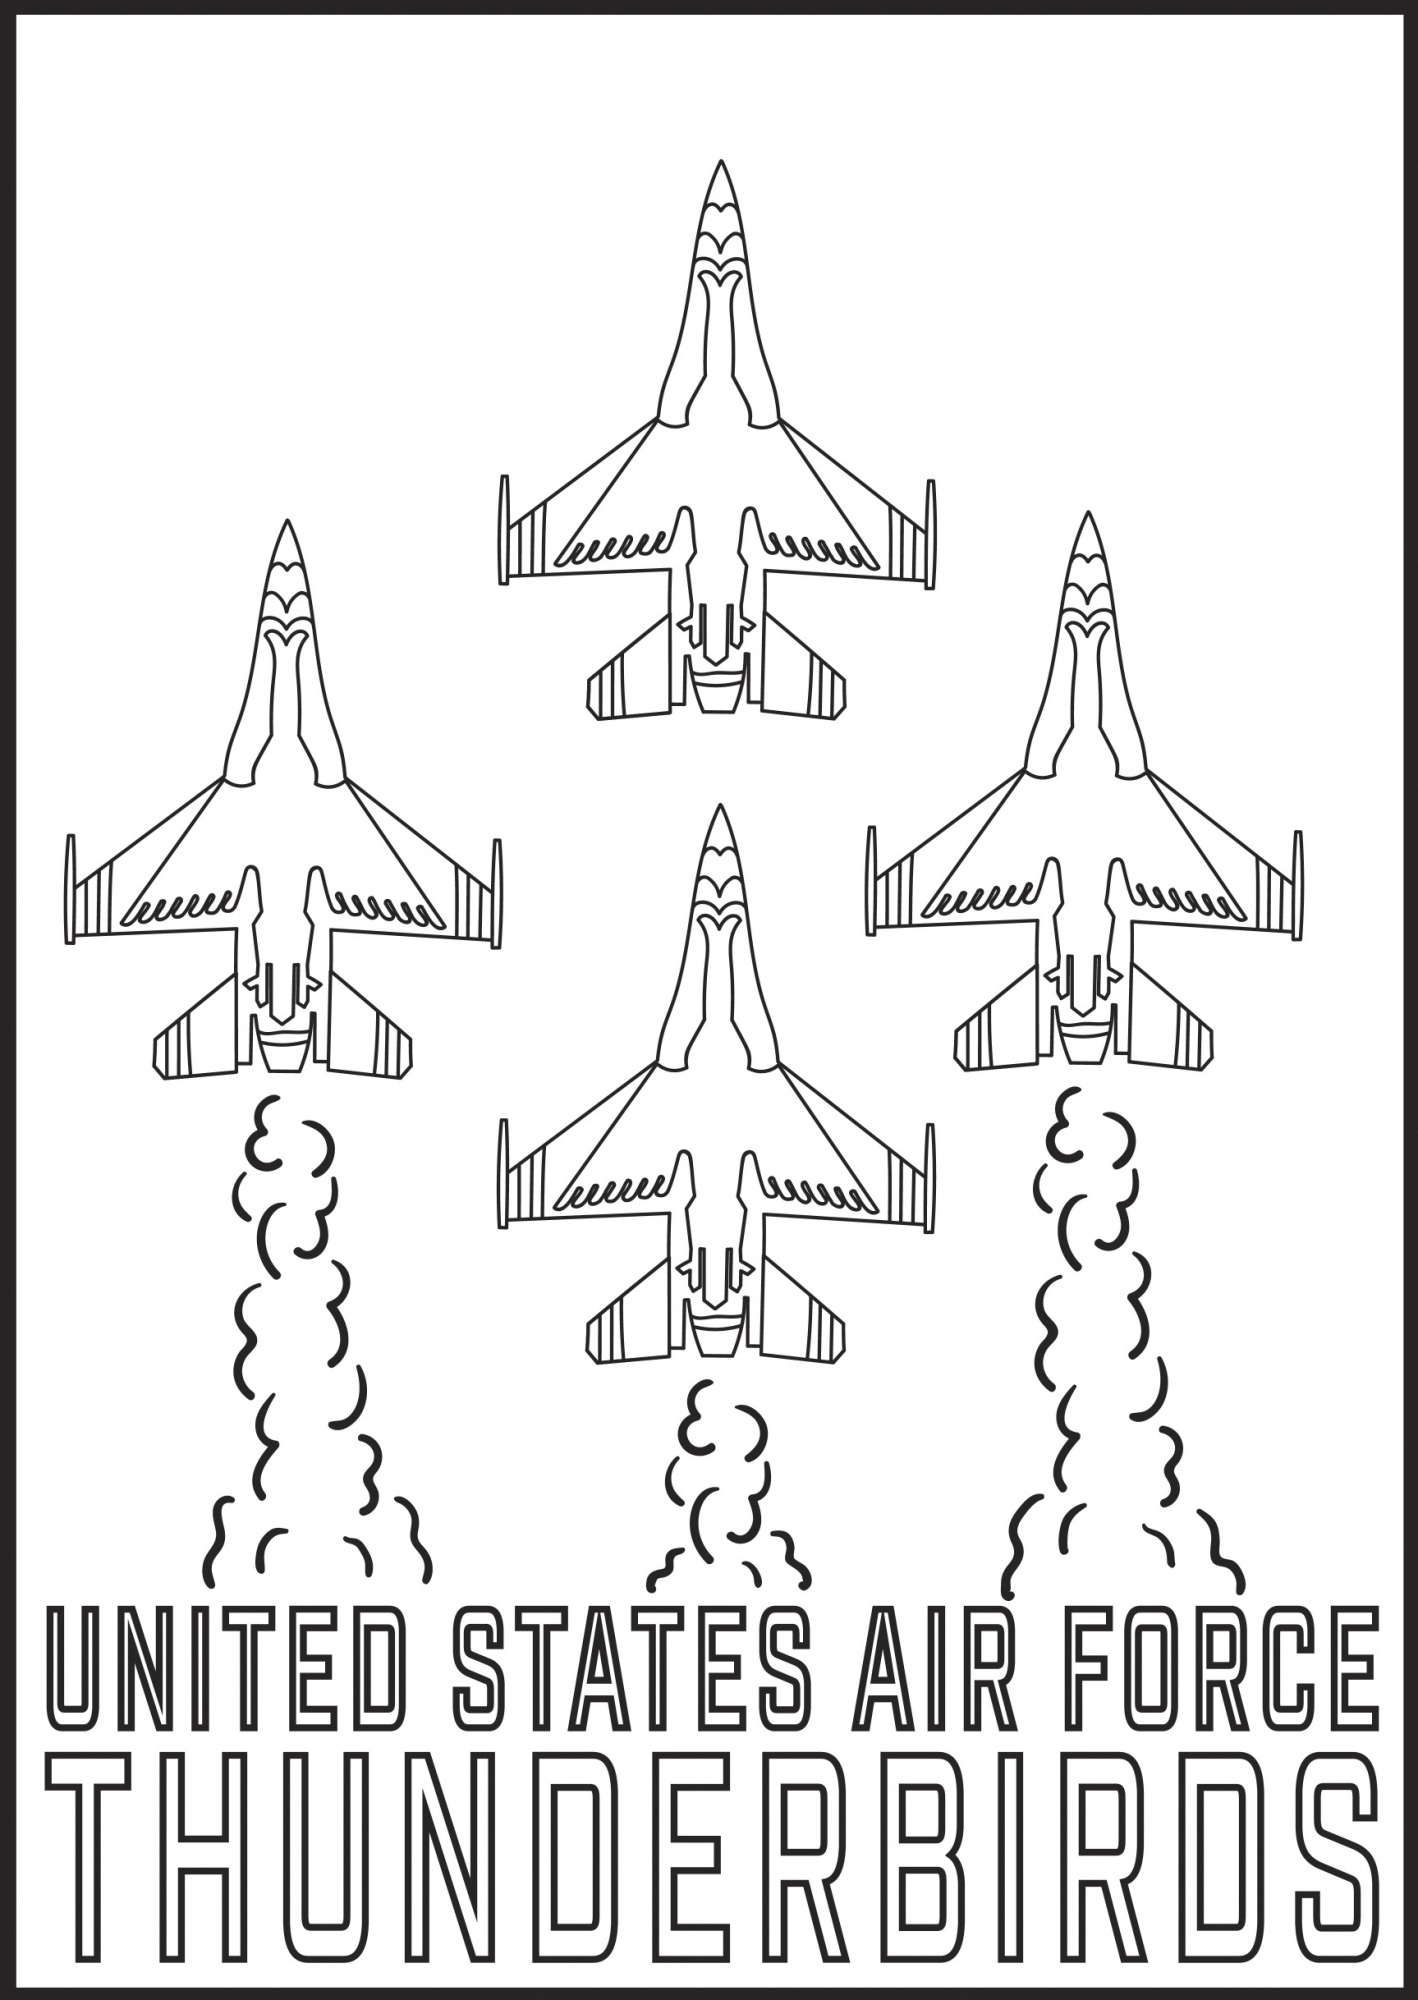 DVIDS - Images - Thunderbirds coloring page [Image 1 of 3]